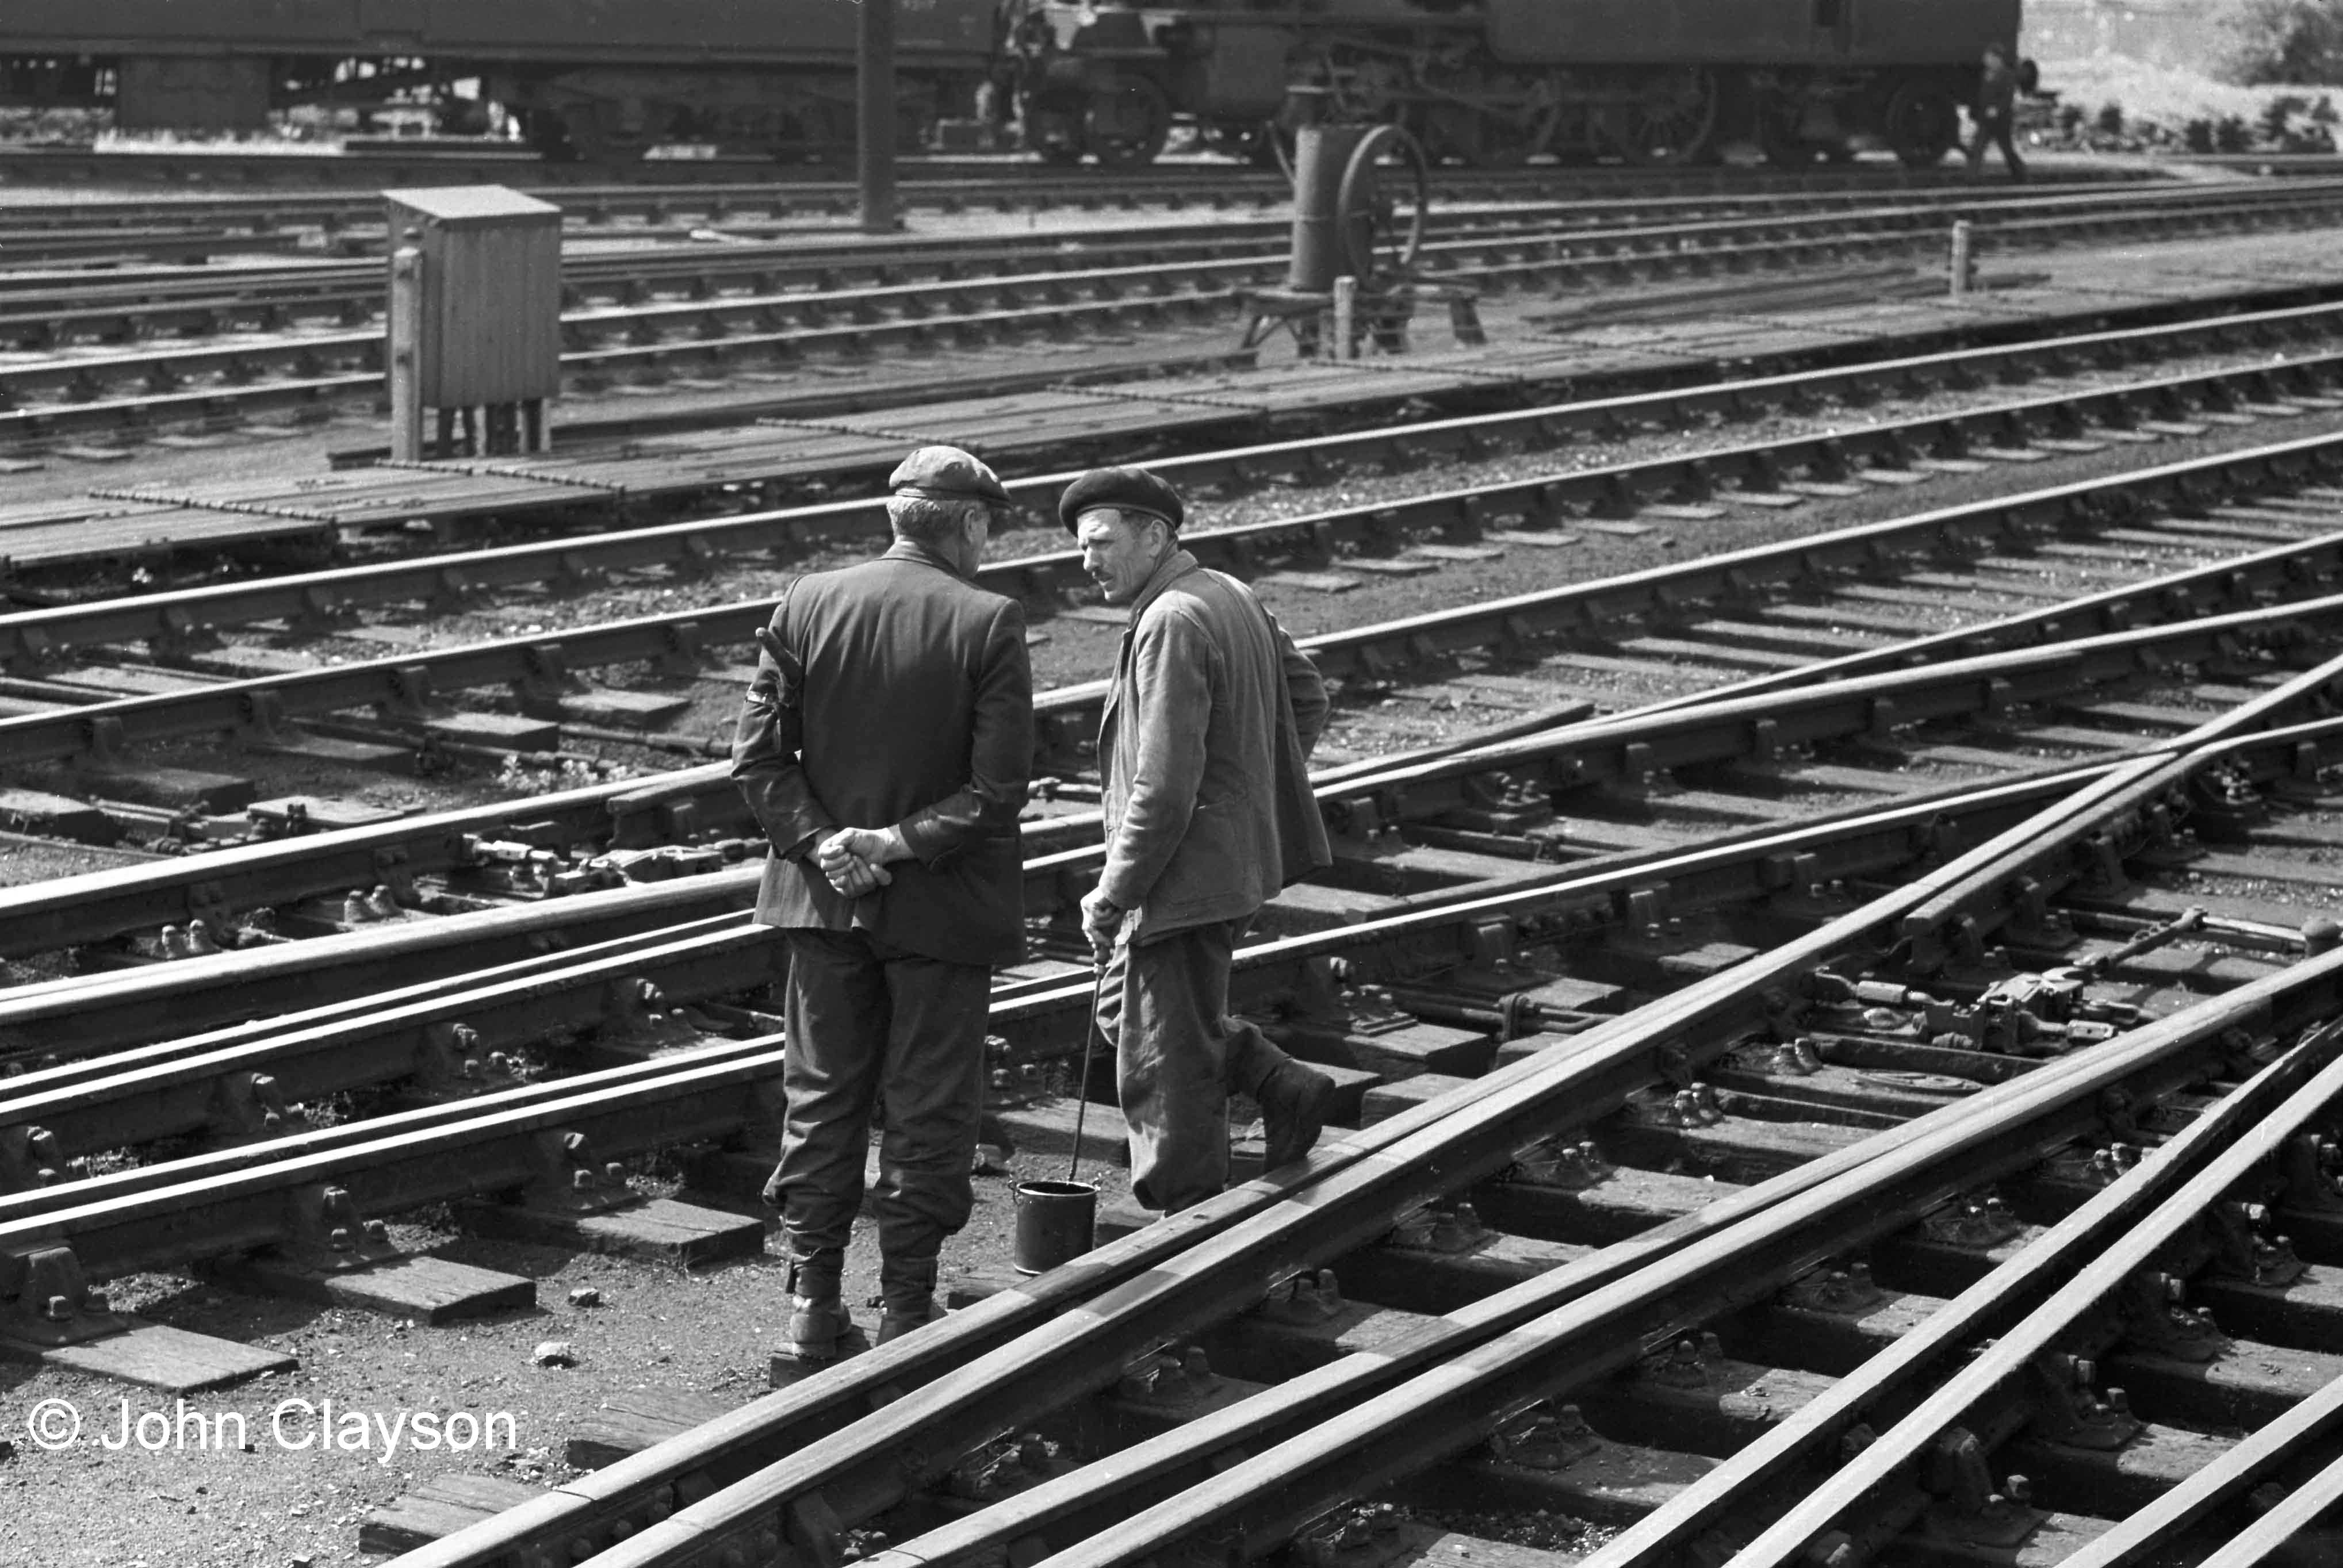 The man on the right is Augustus (Gus) Summers, a former German PoW who worked for Tearson’s (Terson’s?), a contractor who carried out track maintenance and repairs. With his pot of oil and long-sticked brush he is lubricating the point mechanisms near the north end of the station. If you look at the track in the foreground you can see that there is fresh oil around the special rail chairs fixed to the crossing timbers, known as 'slide chairs', on which the switch blades slide. The man on the left is Tom Plummer, the North End Ganger at Grantham, who is acting as ‘Look-Out’ – he is carrying a set of flags under his left arm, on which he also has strapped an enamelled ‘Look-Out’ armband. This was, and still is, a vital role - keeping watch for, and giving warning of, approaching trains which might not be noticed by track workers engaged in a maintenance task on lines which remain open to traffic. The regular lubrication of points is important because the lengths of rail which move across the slide chairs when points are changed are heavy – on a crossover (two points worked together) they might weigh more than a tonne. The signalman’s muscle power also has to move the heavy point rods linking the signal box lever frame with the points. Today, most points on main lines are worked by electric motor. The object in the centre background is a drilling machine, which was used for boring holes in point stretcher bars. May 24th 1962 Photograph by Cedric A. Clayson, 